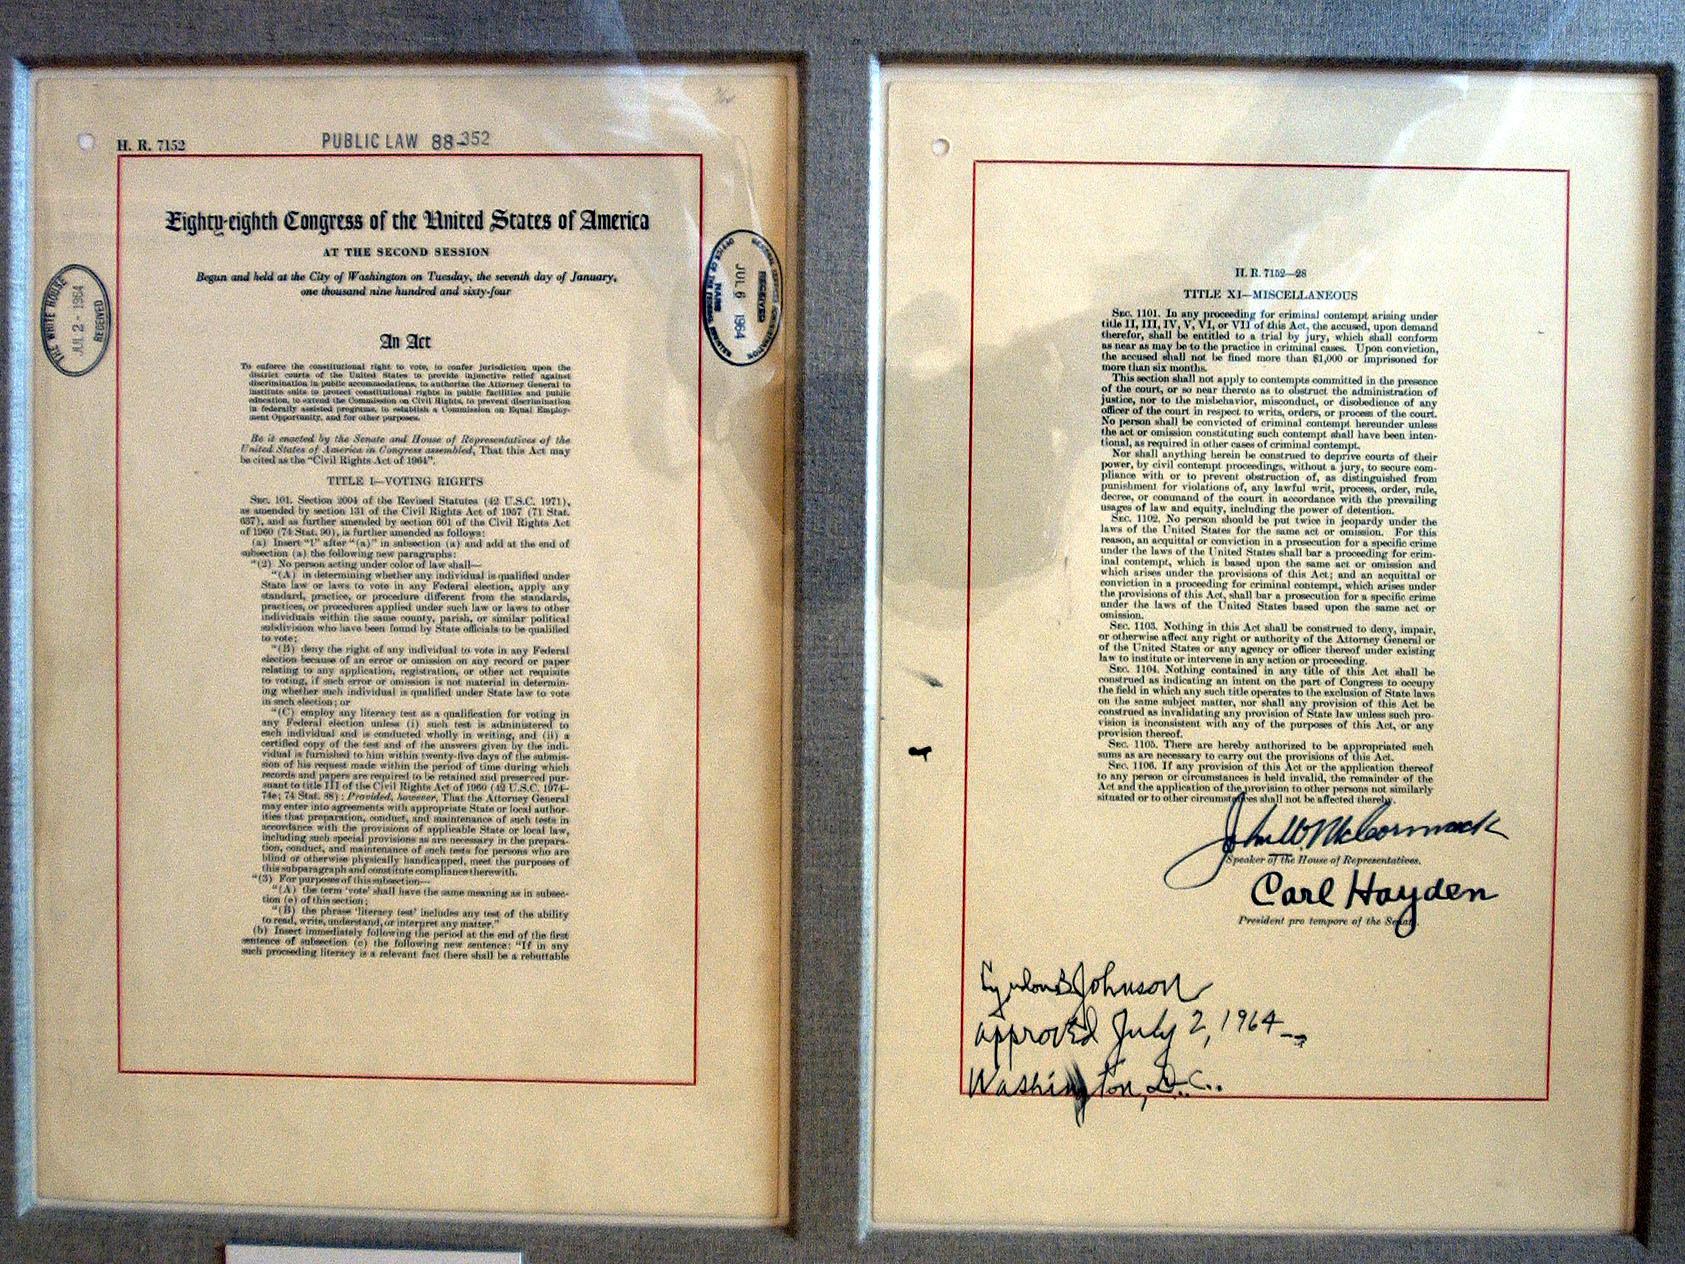 The actual Title VII of the Civil Rights Act of 1964 document on display in the East Room of the White House in Washington, DC